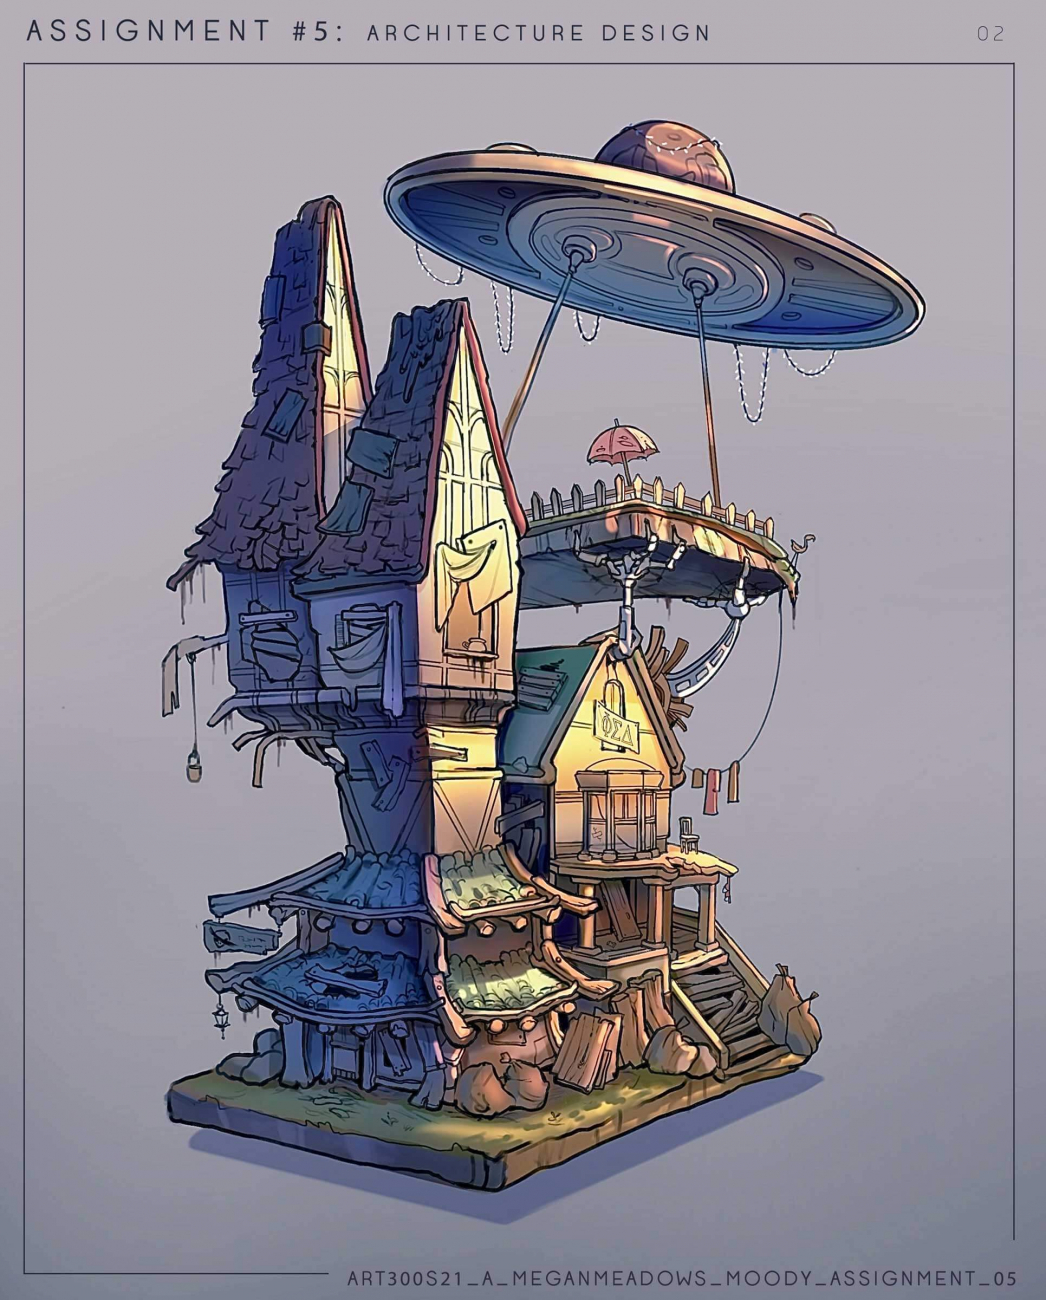 A house with various add-ons and a UFO at the top.